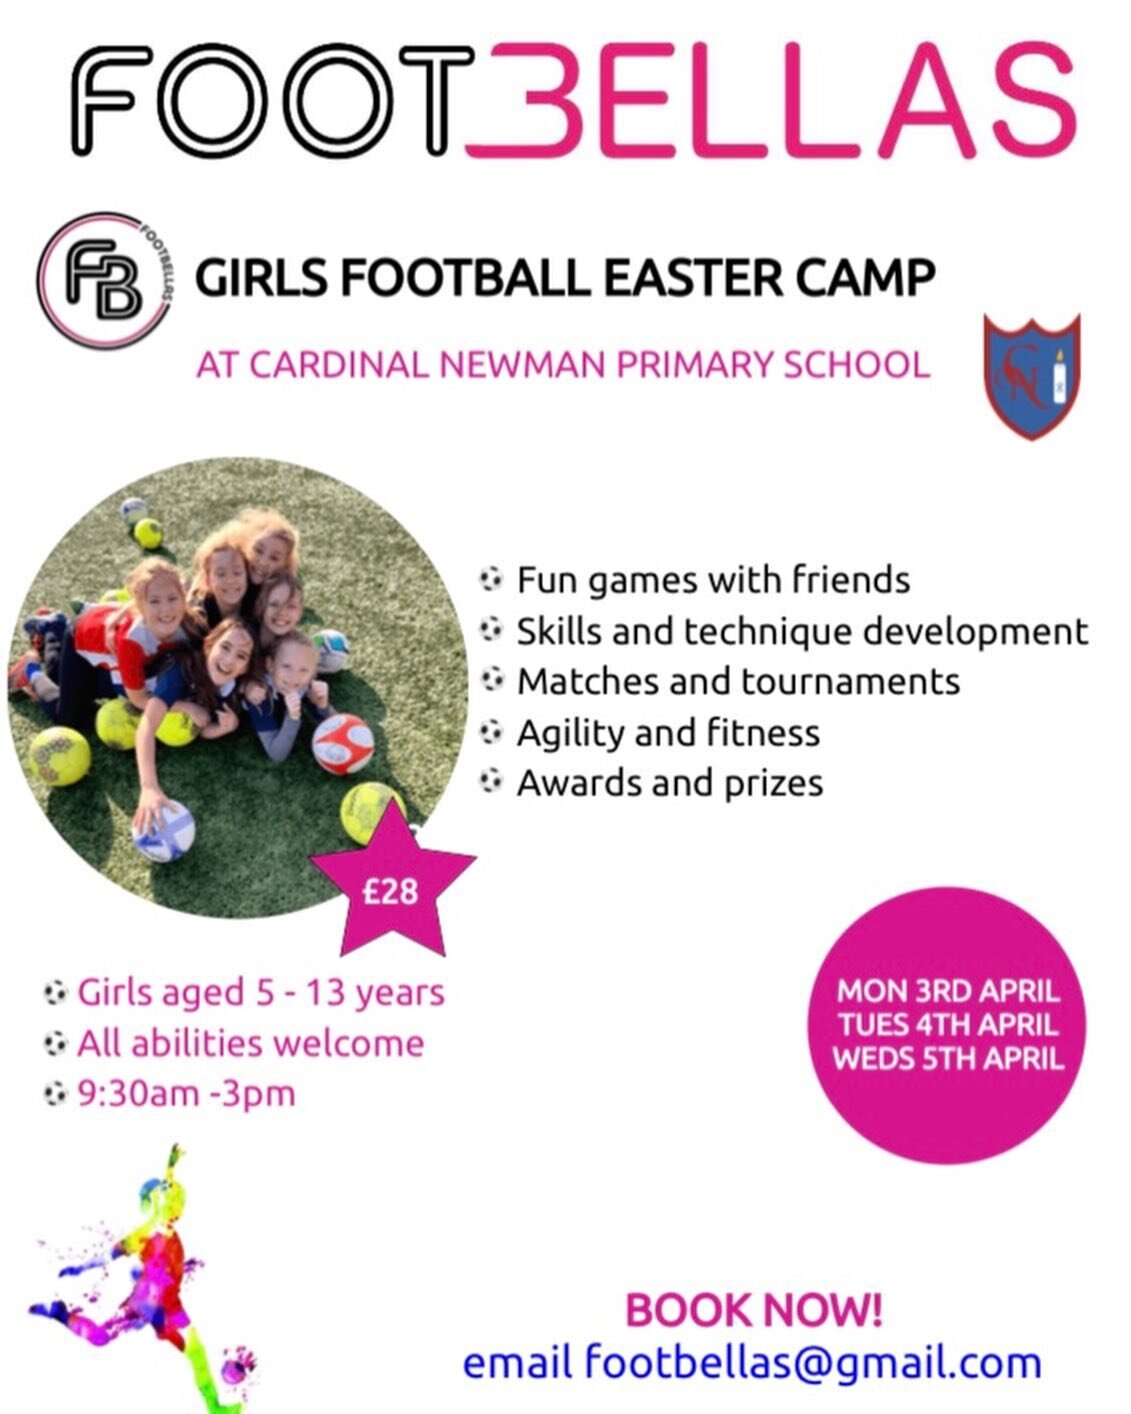 Our football holiday camps for girls aged 5-13 years are back this Easter! ⚽ 🐣 

Week 1
Monday 3rd, Tuesday 4th and Wednesday 5th April at Cardinal Newman Catholic Primary School, Hersham
To book a day in week 1 click here 👉 https://forms.gle/5nWco